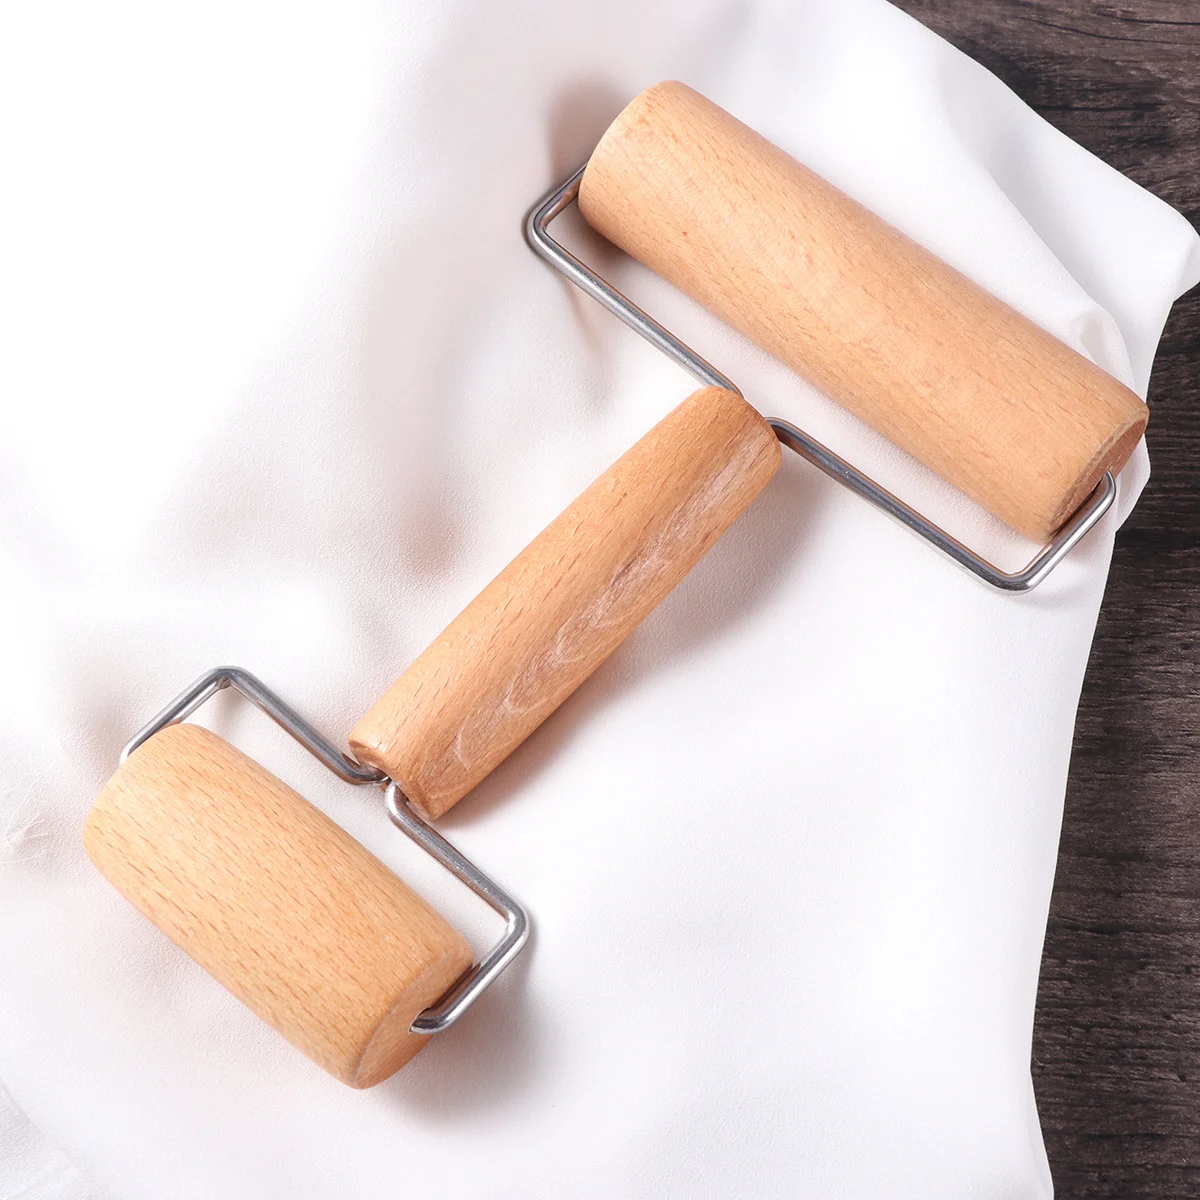 

Rolling Pin Roller Pizza Baking Dough Wood Pastry Clay Cooking Stick Press Wooden French Non Kitchen Docker Nonstick Dowel